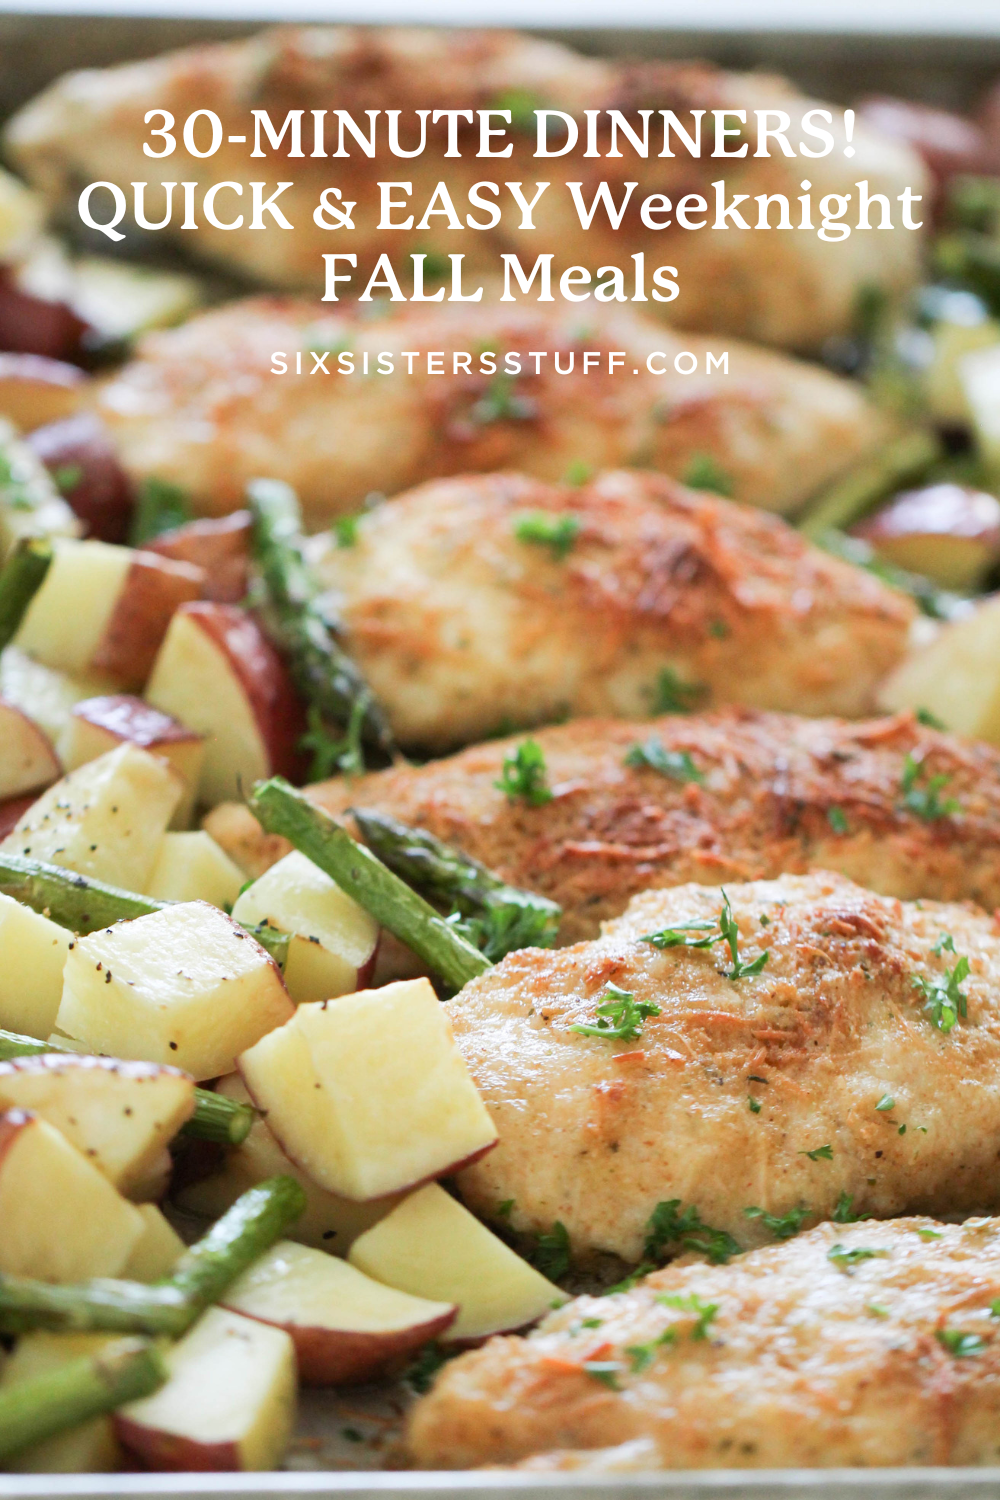 30-MINUTE DINNERS- QUICK & EASY Weeknight FALL Meals